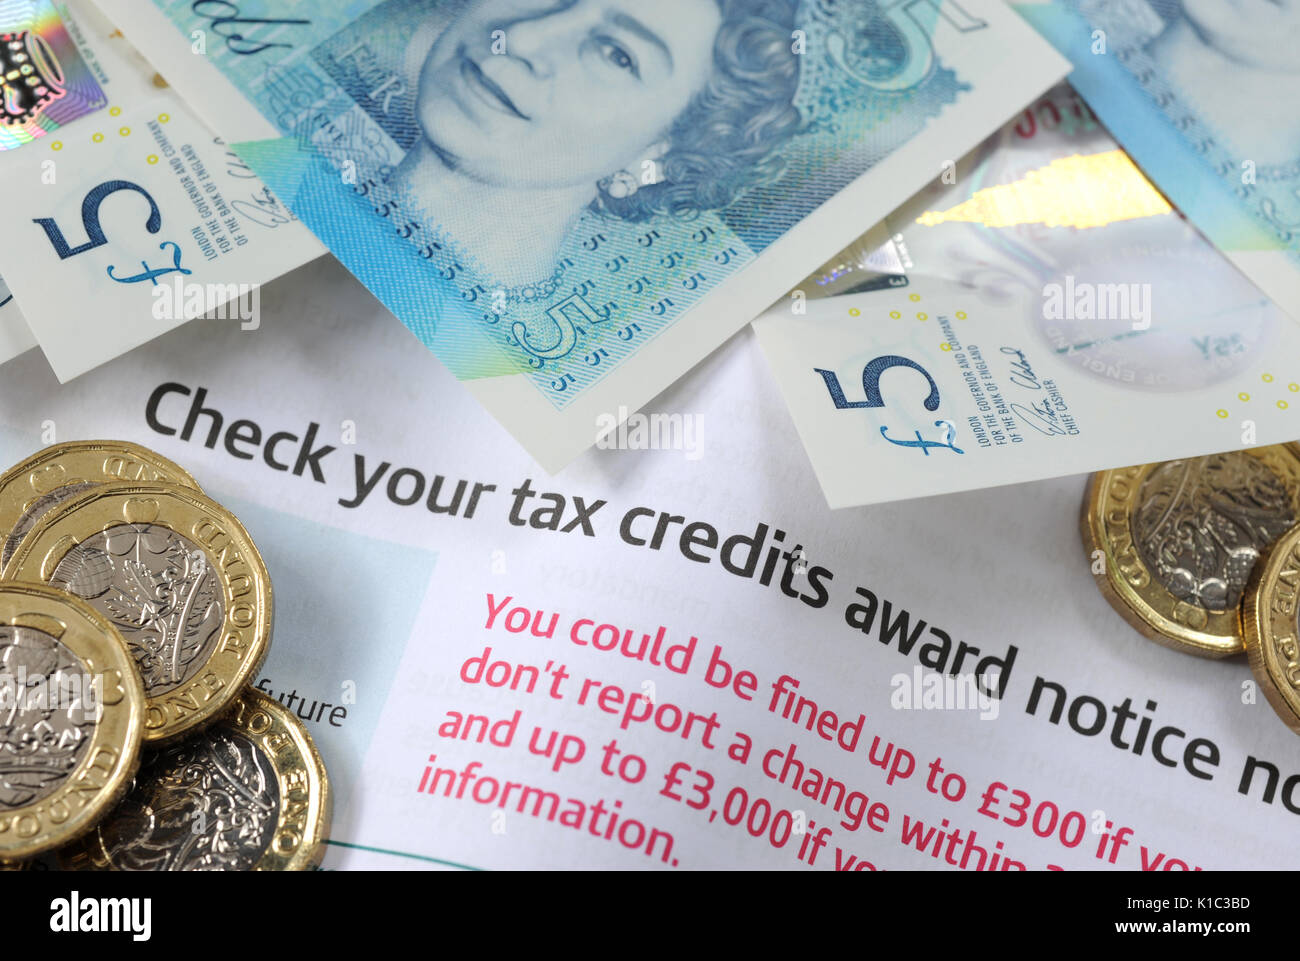 government-working-tax-credits-award-notice-letter-with-british-money